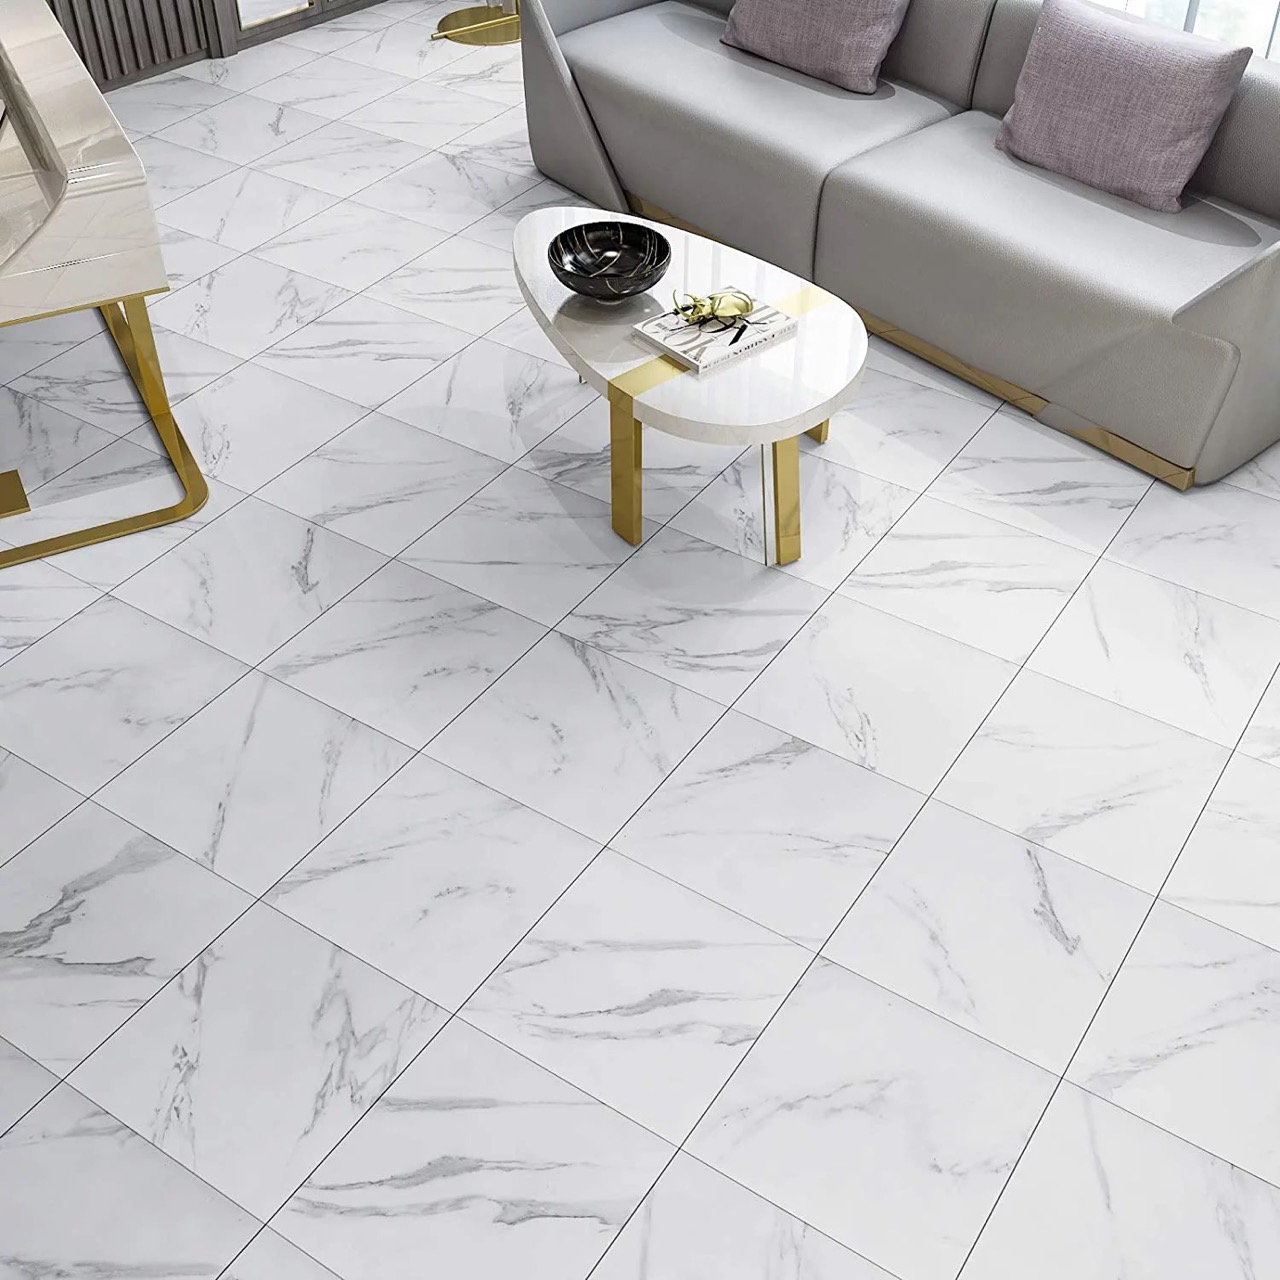 Where Can I Buy Peel And Stick Floor Tiles 1694086897 